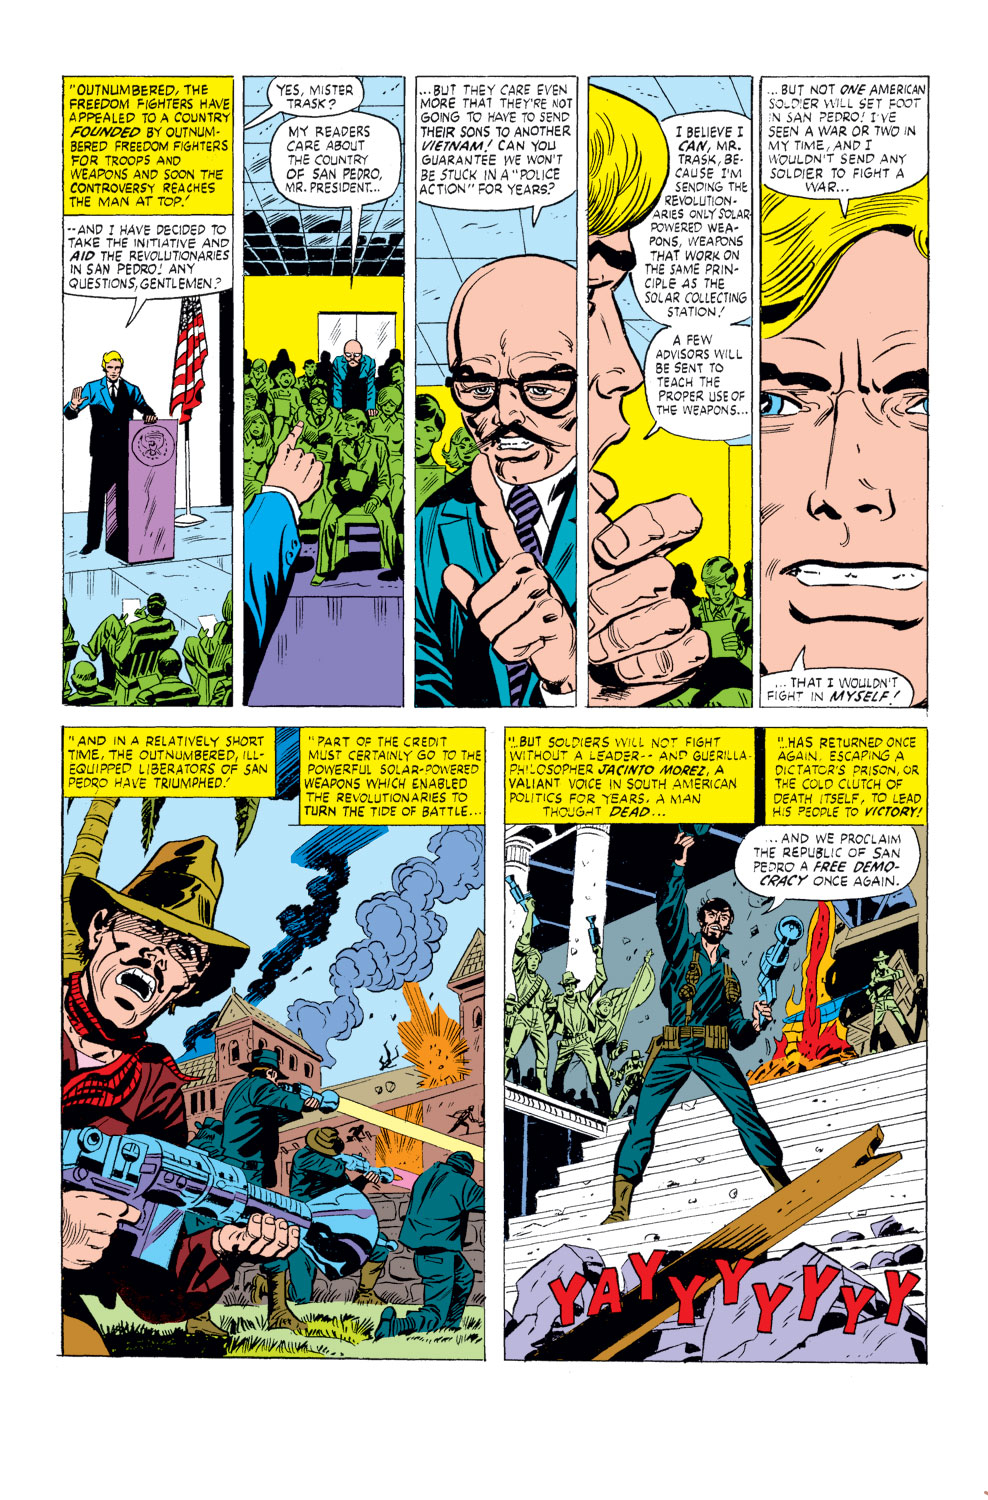 What If? (1977) issue 26 - Captain America had been elected president - Page 13